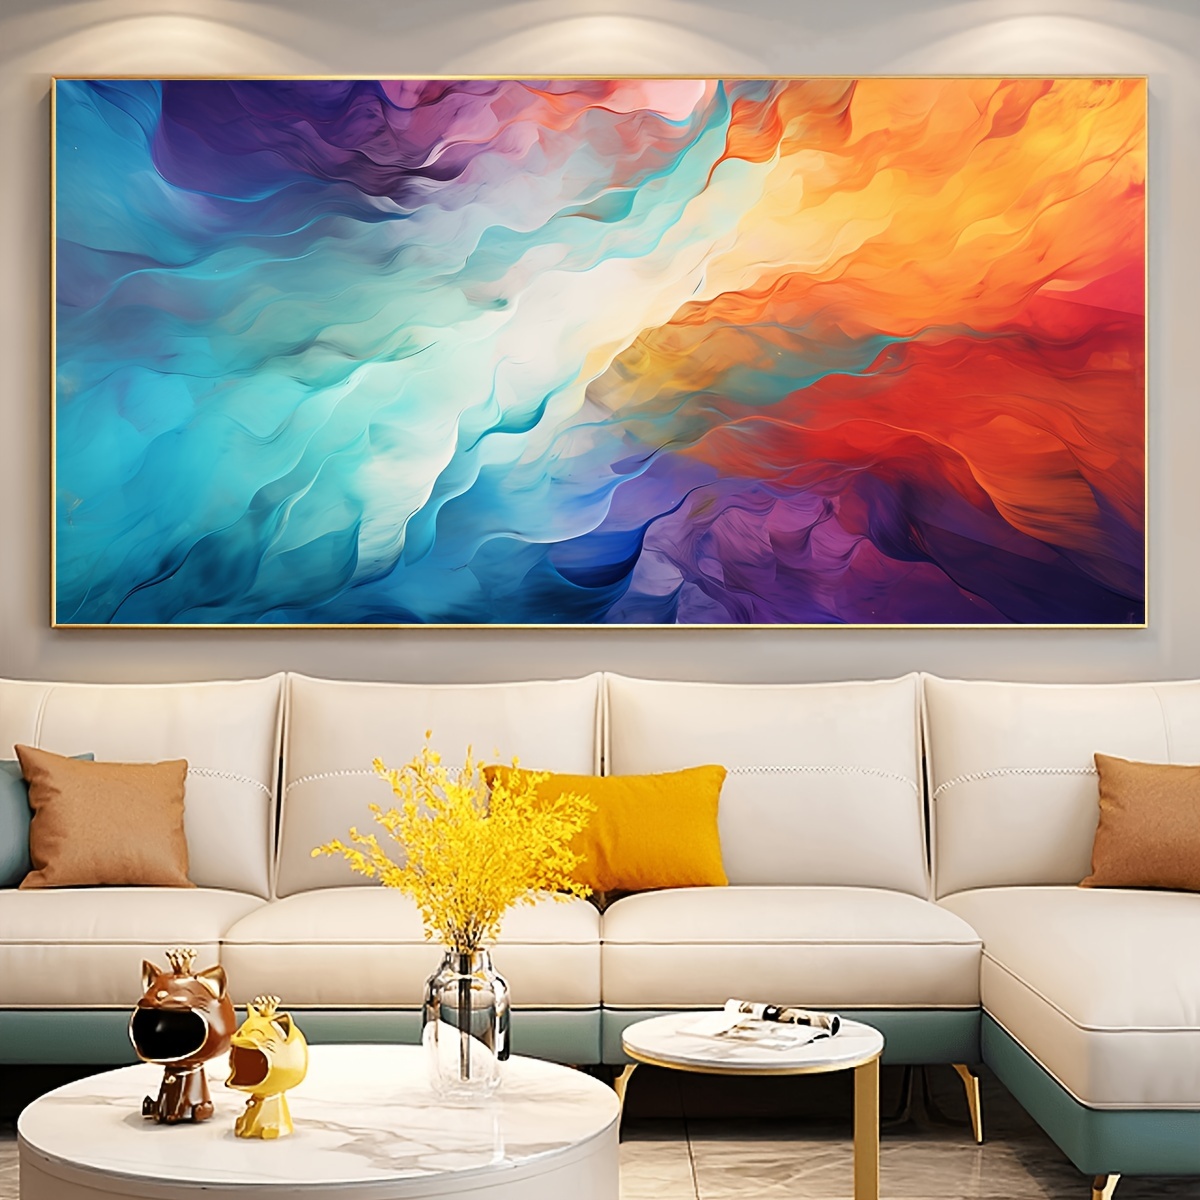 

1pc Unframed Canvas Poster, Modern Art, Colorful Auspicious Clouds, Ideal Gift For Bedroom Living Room Corridor, Wall Art, Wall Decor, Winter Decor, Room Decoration